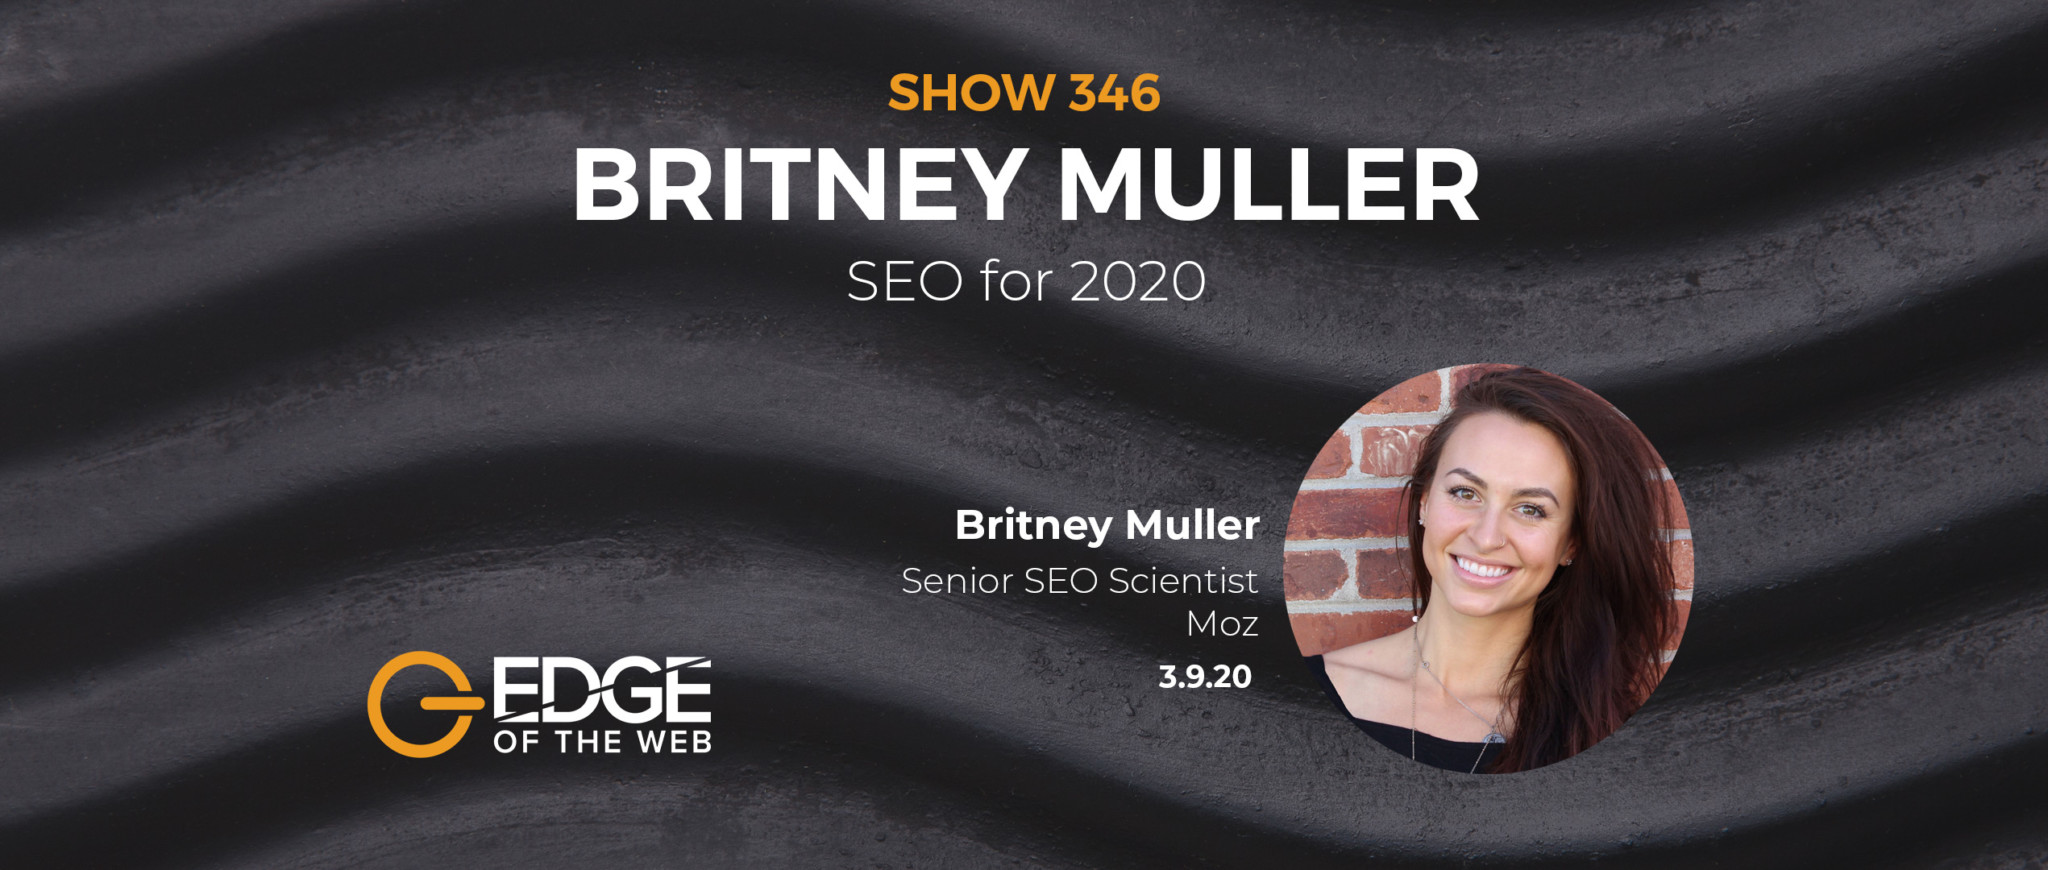 Show 346: SEO for 2020, featuring Britney Muller